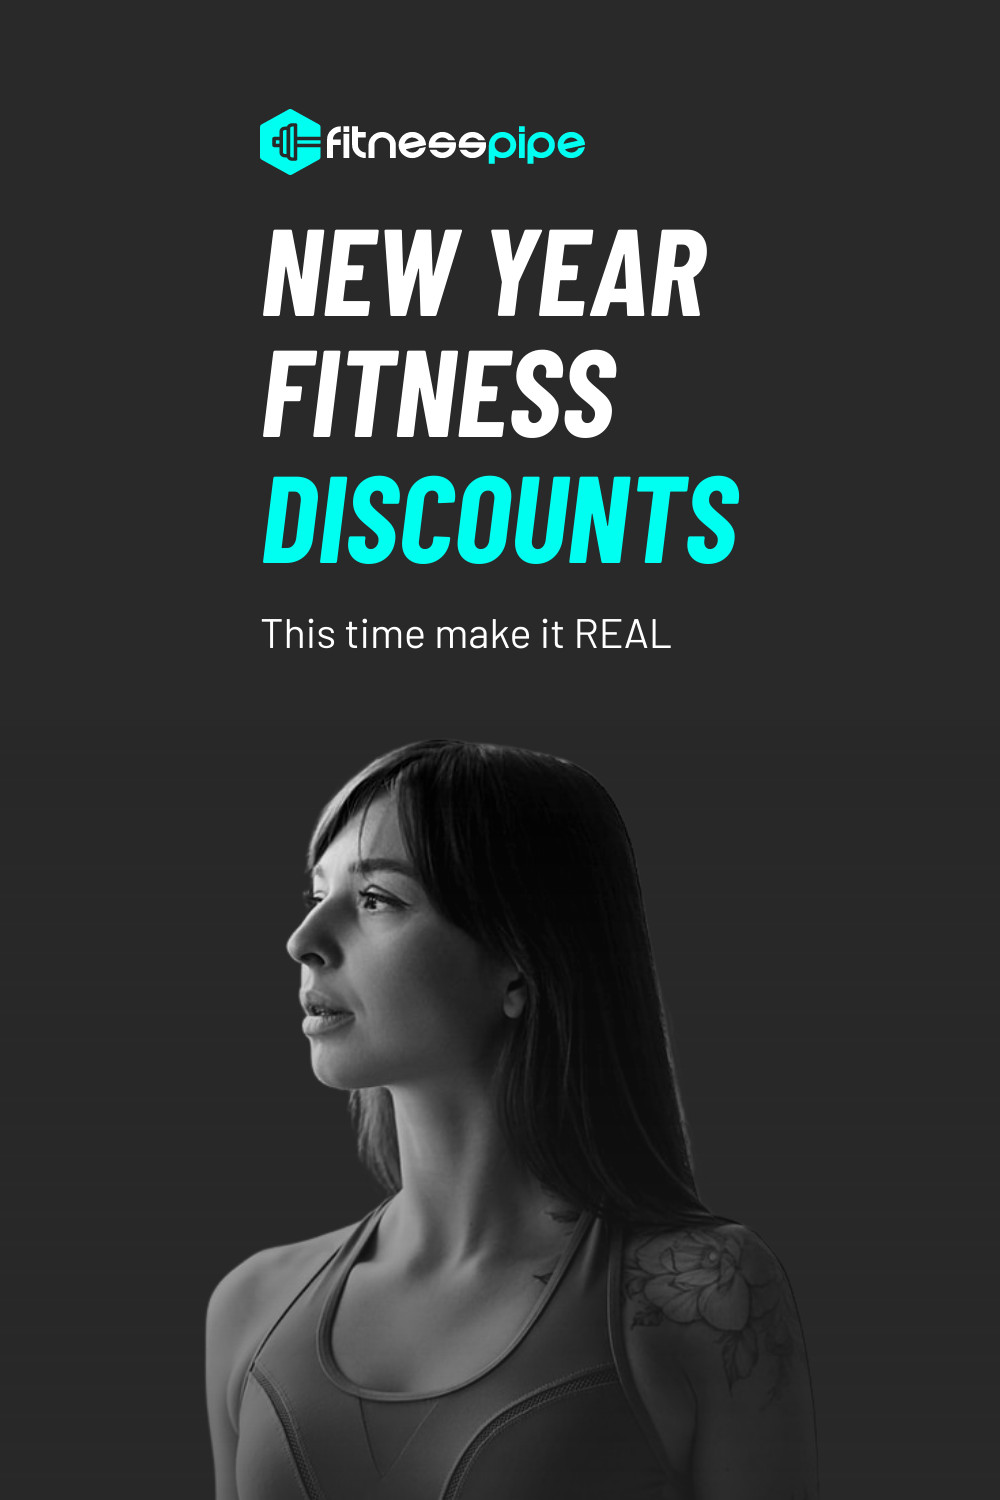 New Year Fitness Real Discounts